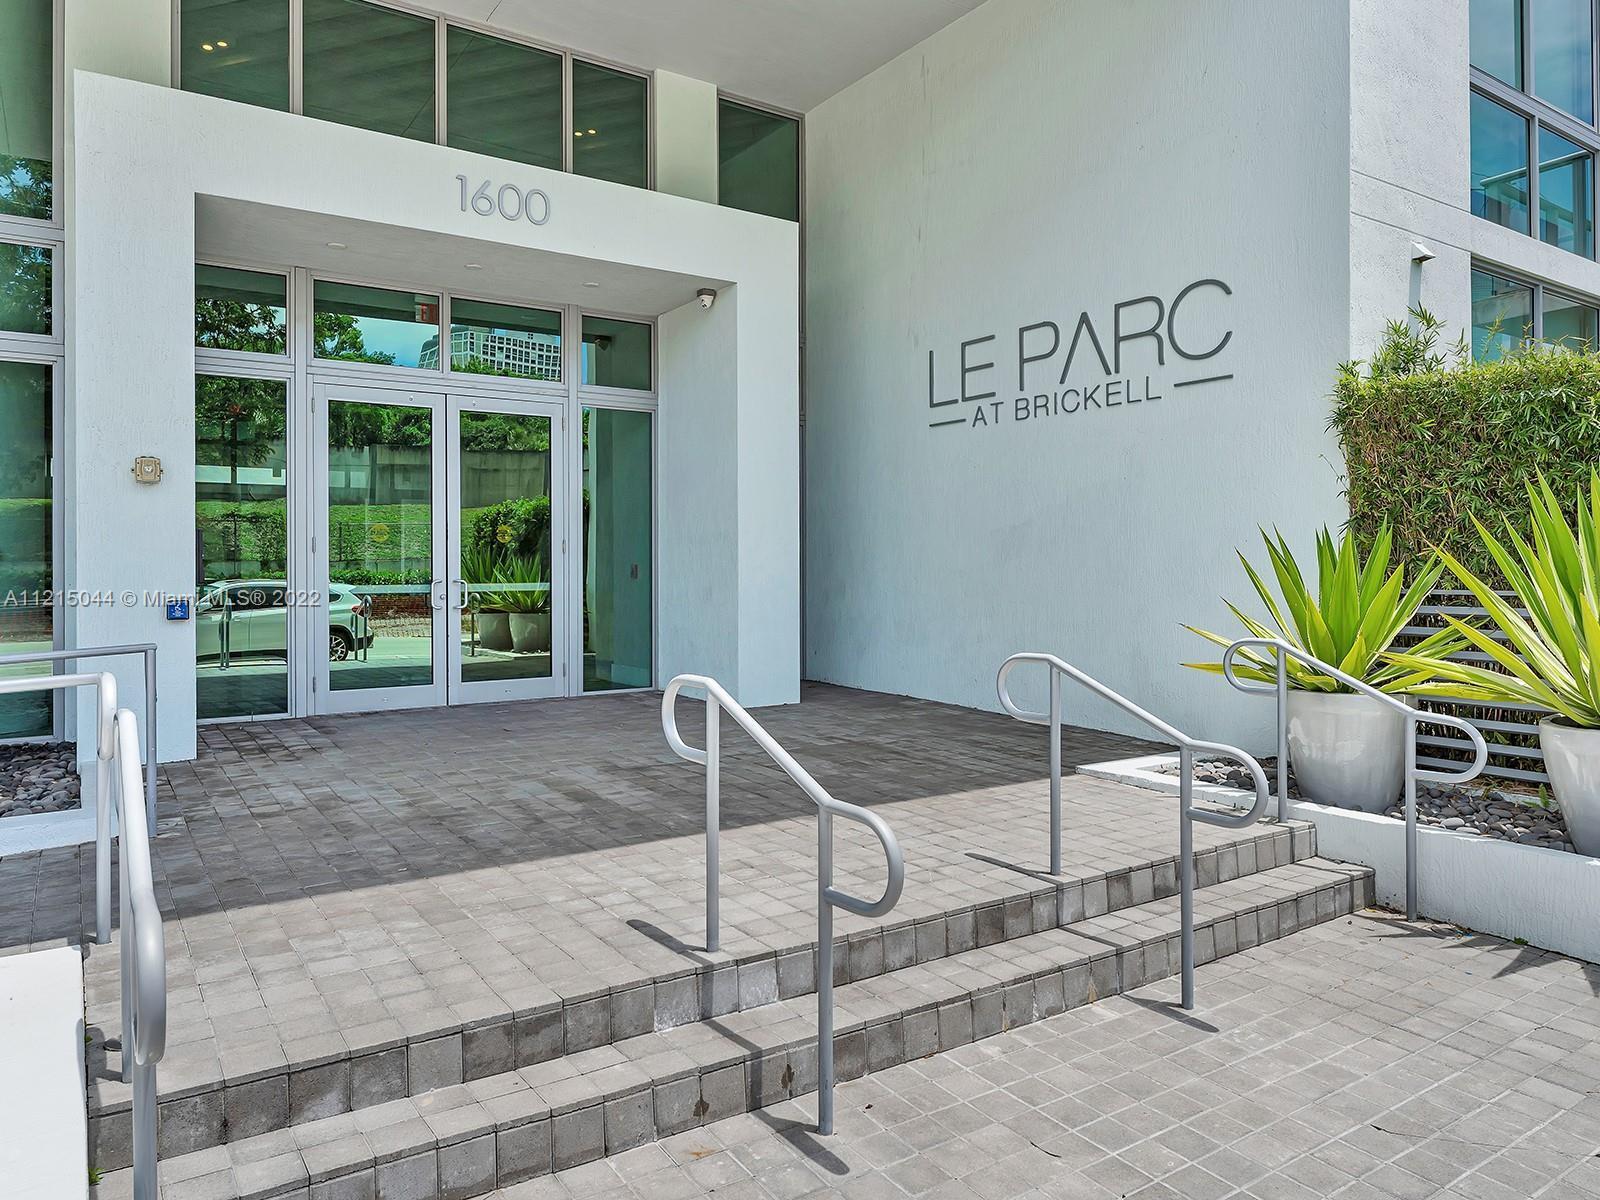 Bright and modern studio at Le Parc Brickell with elegant design influences. This perfect investment